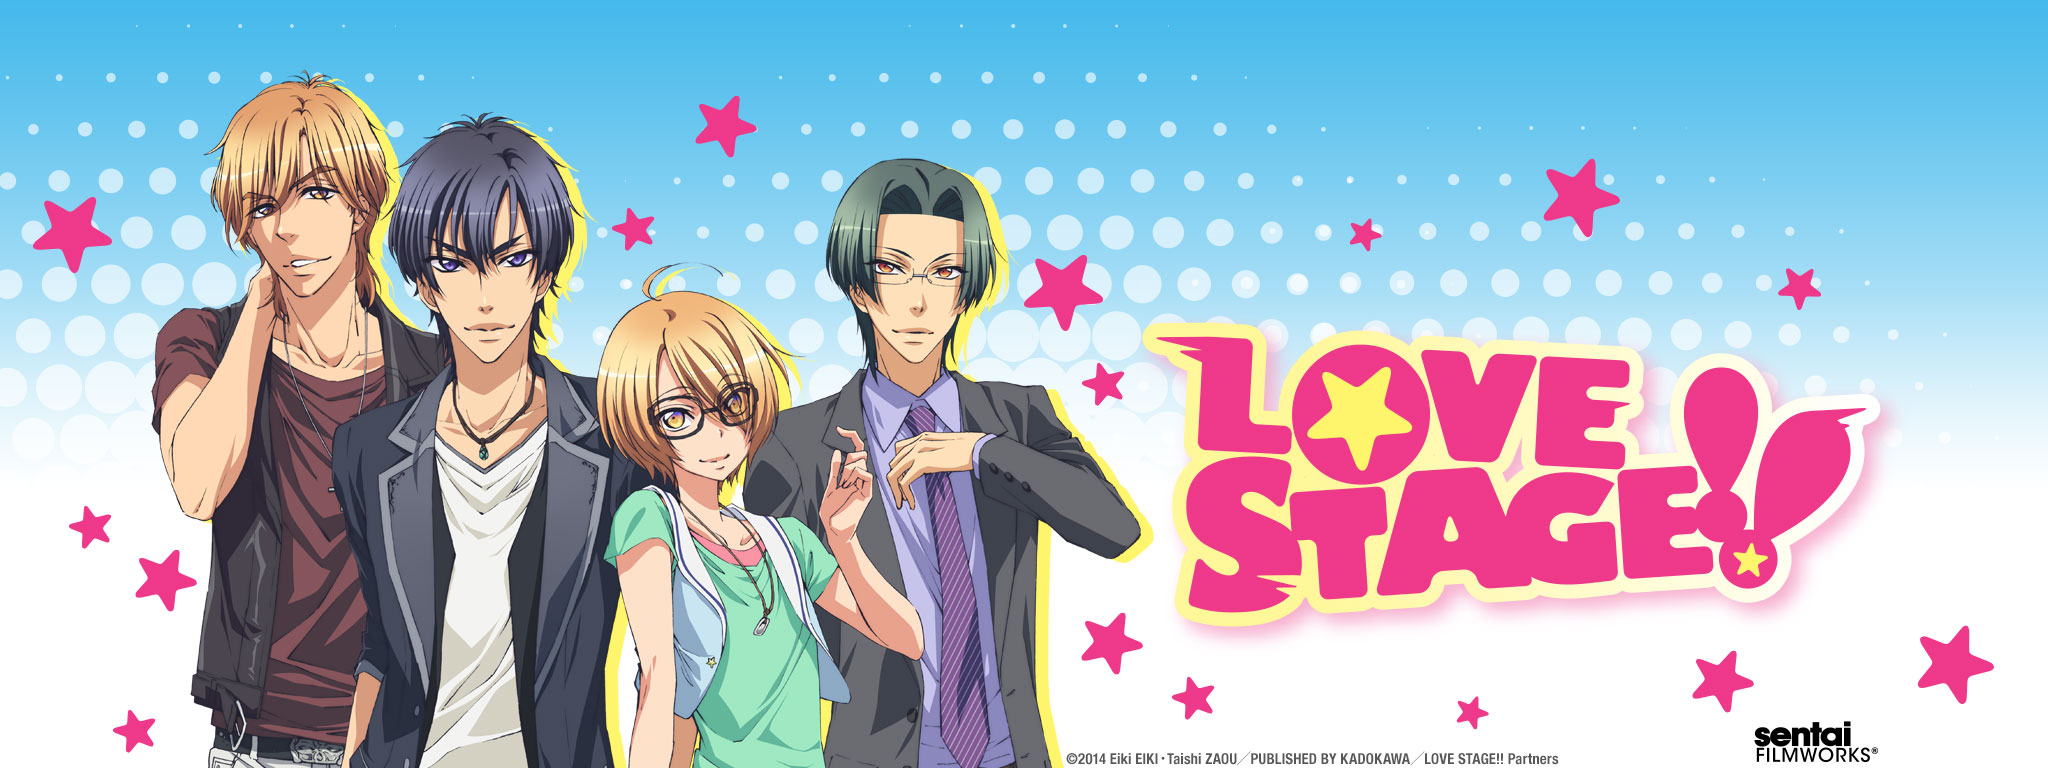 Live action per Love Stage!!